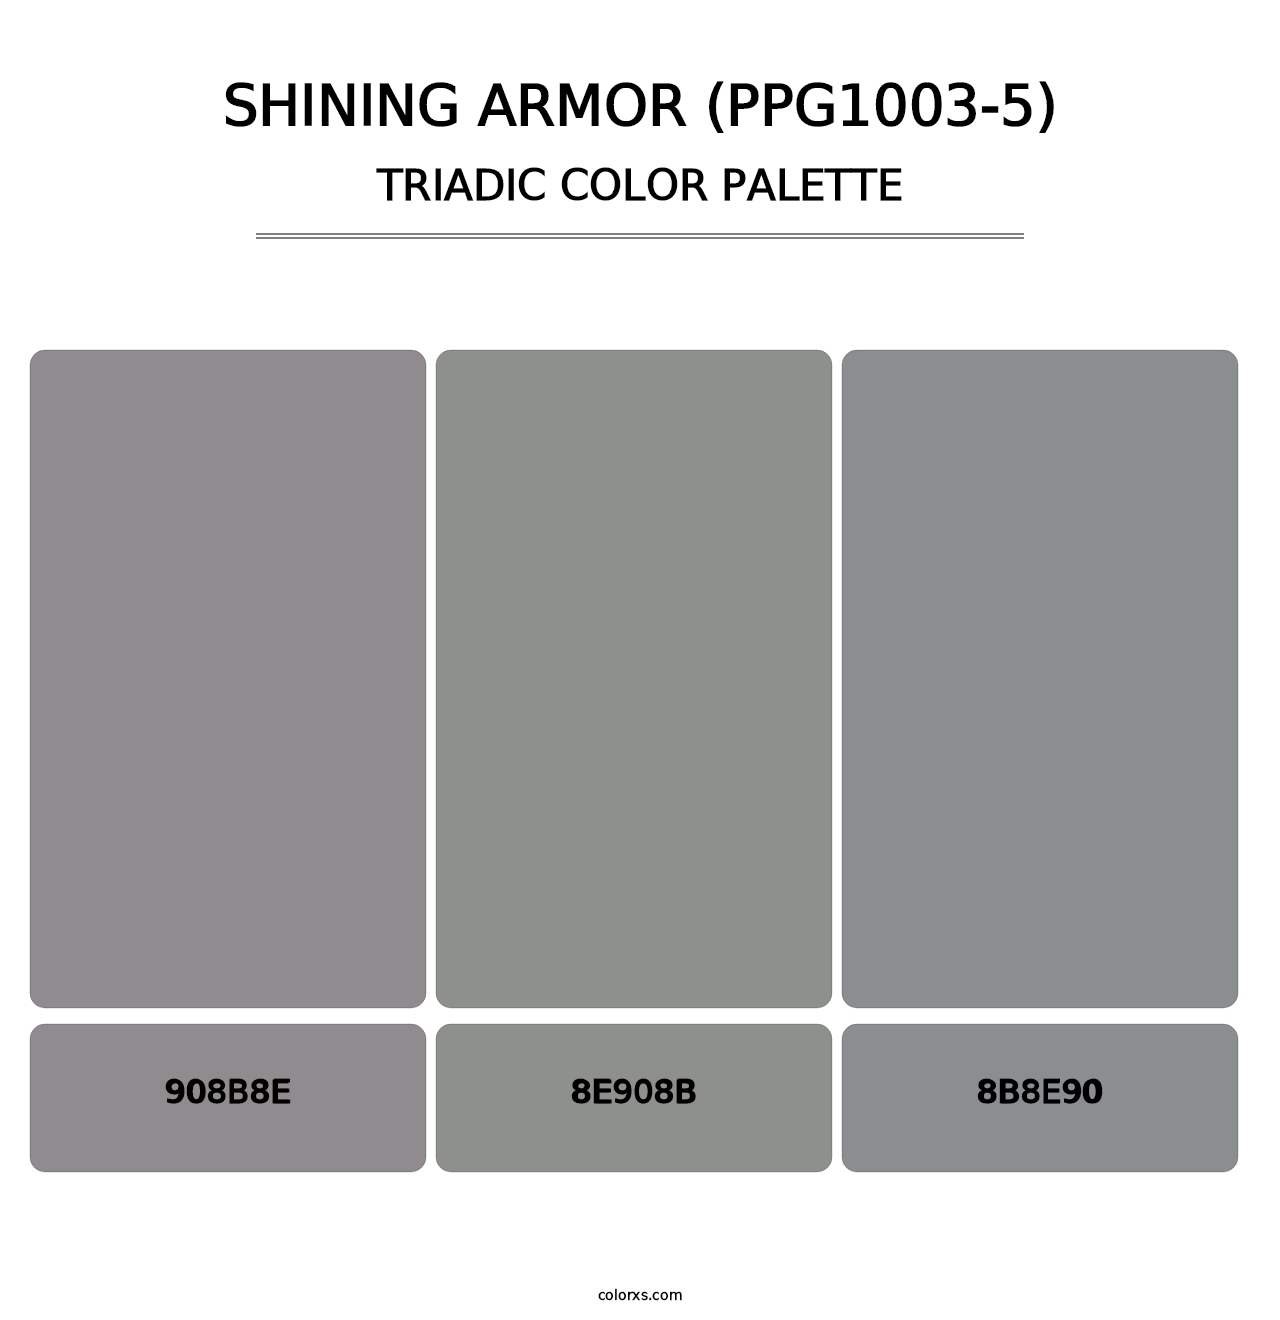 Shining Armor (PPG1003-5) - Triadic Color Palette